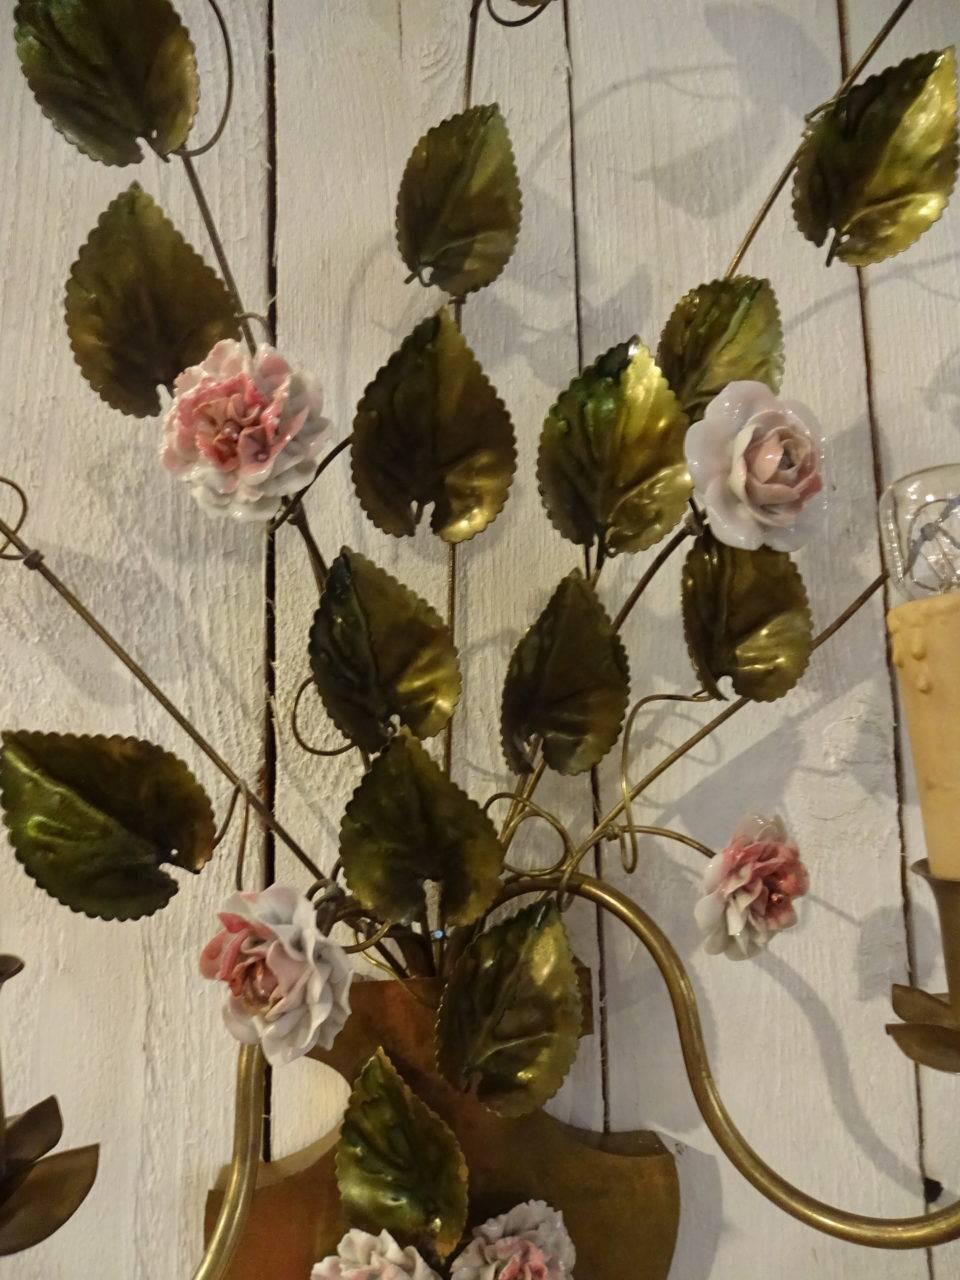 A pair of gorgeous French lamps or sconces, from circa 1950. The pair is made of brass and each with two arms for light as well as numerous small pink/white handmade porcelain flowers and small leaves in brass.

Measures: H 50 x W 35 x D 15 cm.